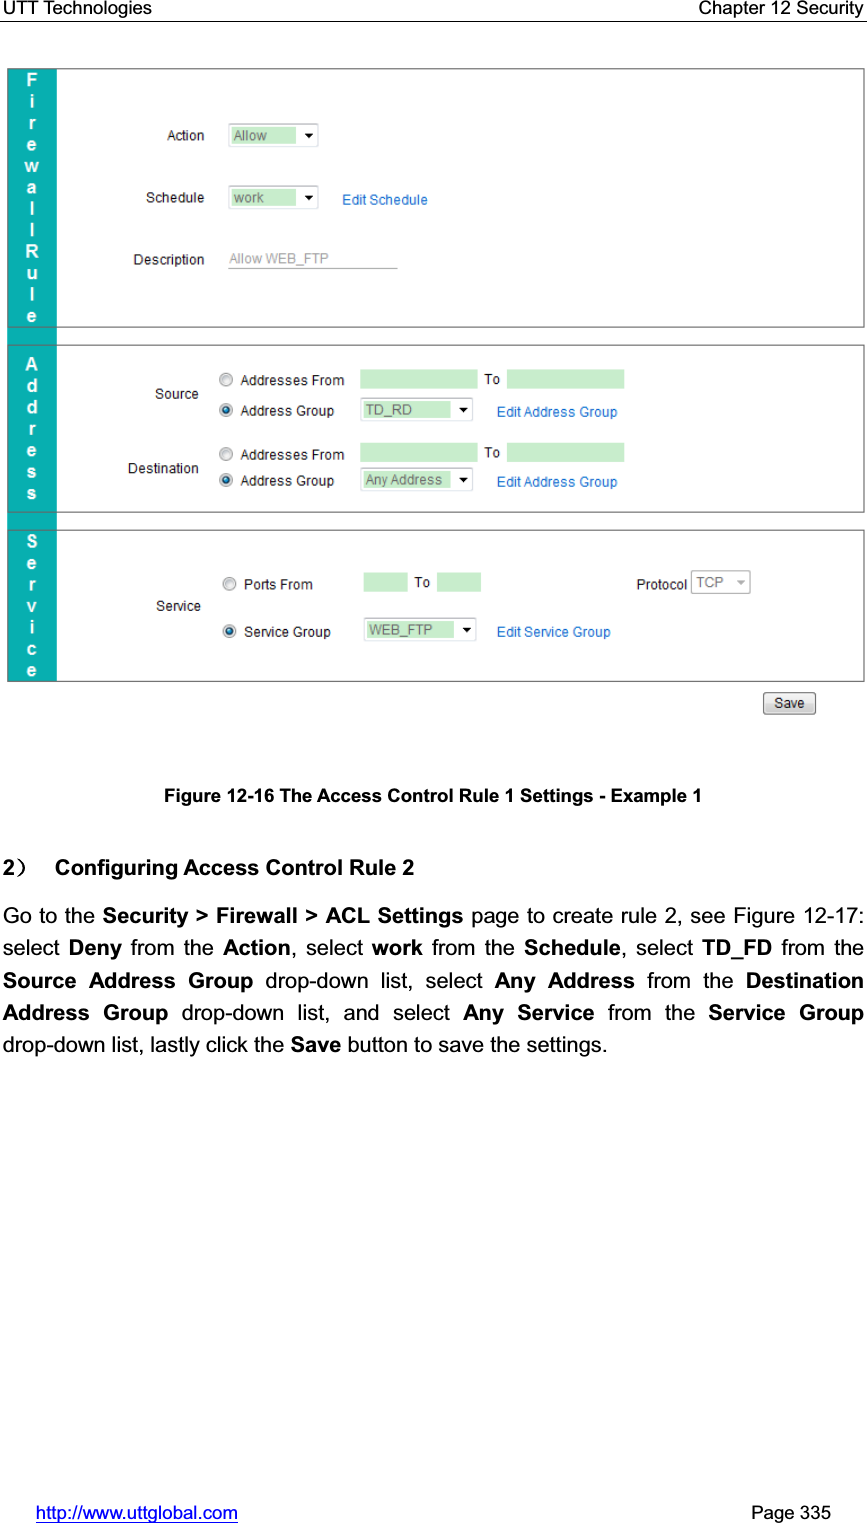 UTT Technologies    Chapter 12 Security   http://www.uttglobal.com                                                       Page 335 Figure 12-16 The Access Control Rule 1 Settings - Example 1 2˅ Configuring Access Control Rule 2 Go to the Security &gt; Firewall &gt; ACL Settings page to create rule 2, see Figure 12-17: select  Deny from the Action, select work from the Schedule, select TD_FD from the Source Address Group drop-down list, select Any Address from the Destination Address Group drop-down list, and select Any Service from the Service Groupdrop-down list, lastly click the Save button to save the settings.